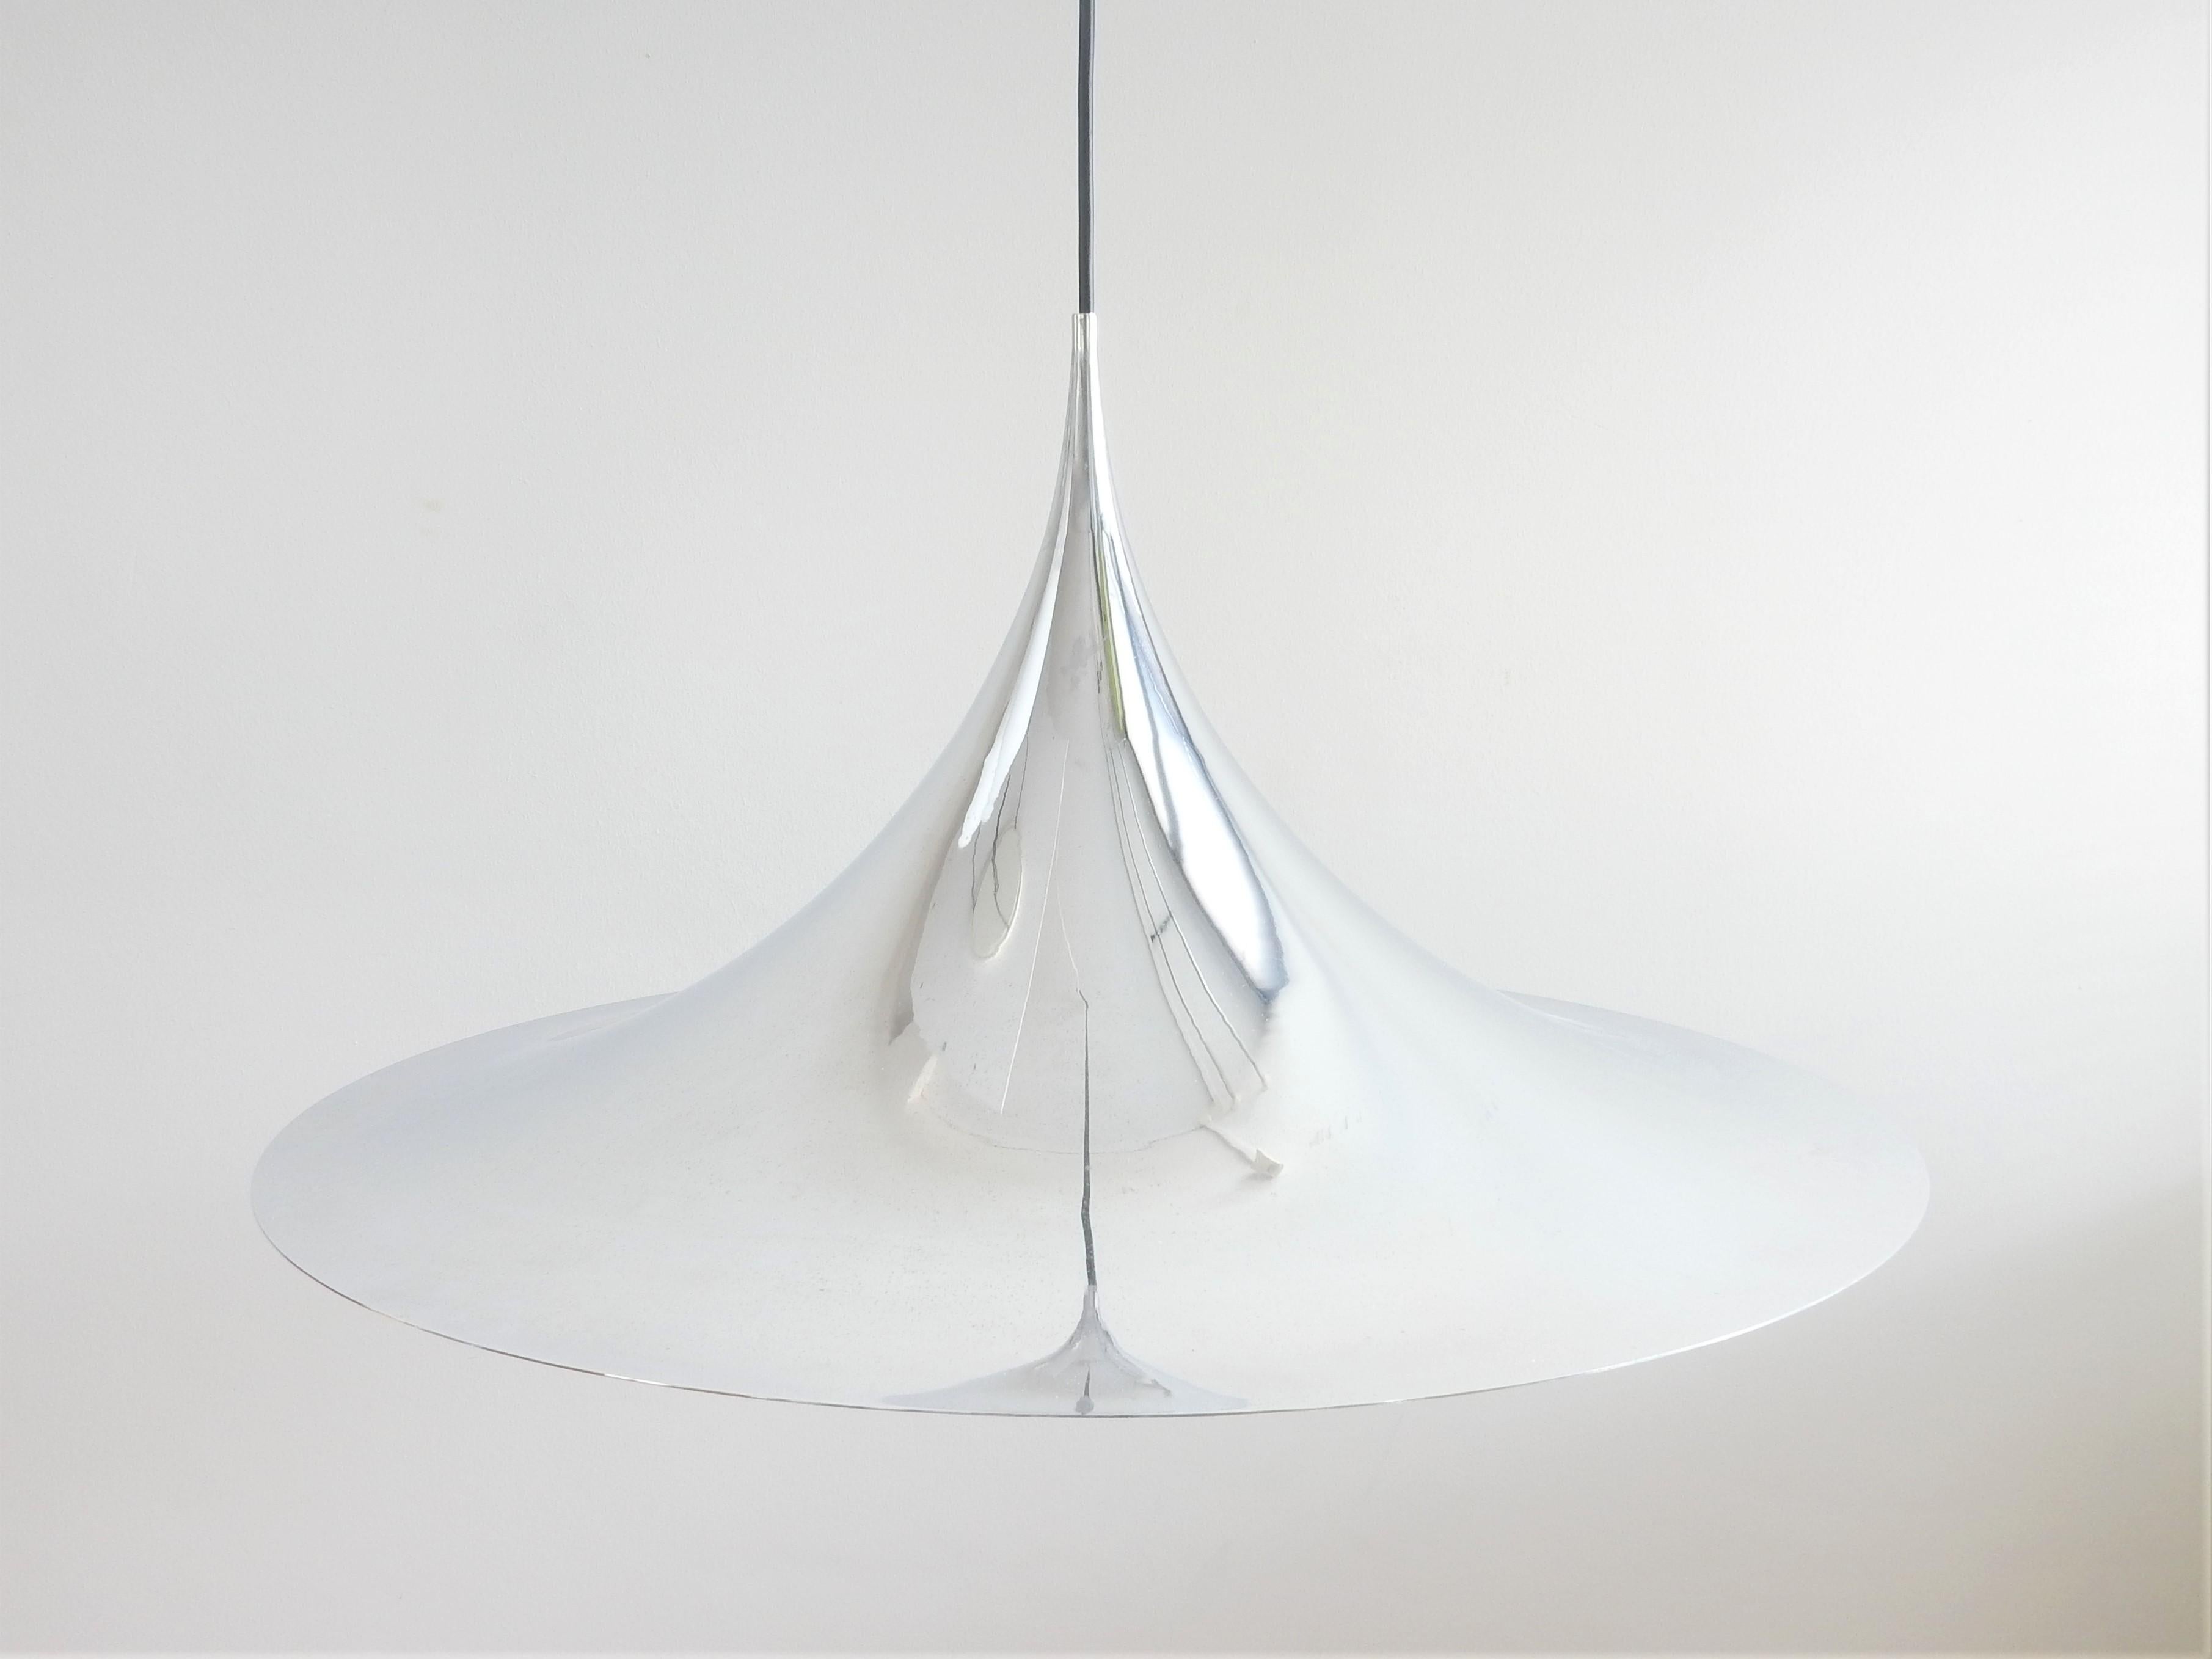 This famous model 'Semi' or 'witch hat' pendant lamp was designed by Claus Bonderup and Torsten Thorup for Fog & Mørup in 1968. This piece is in chrome-plated metal and is the largest and most charming version with a diameter of 70 cm. A beautiful